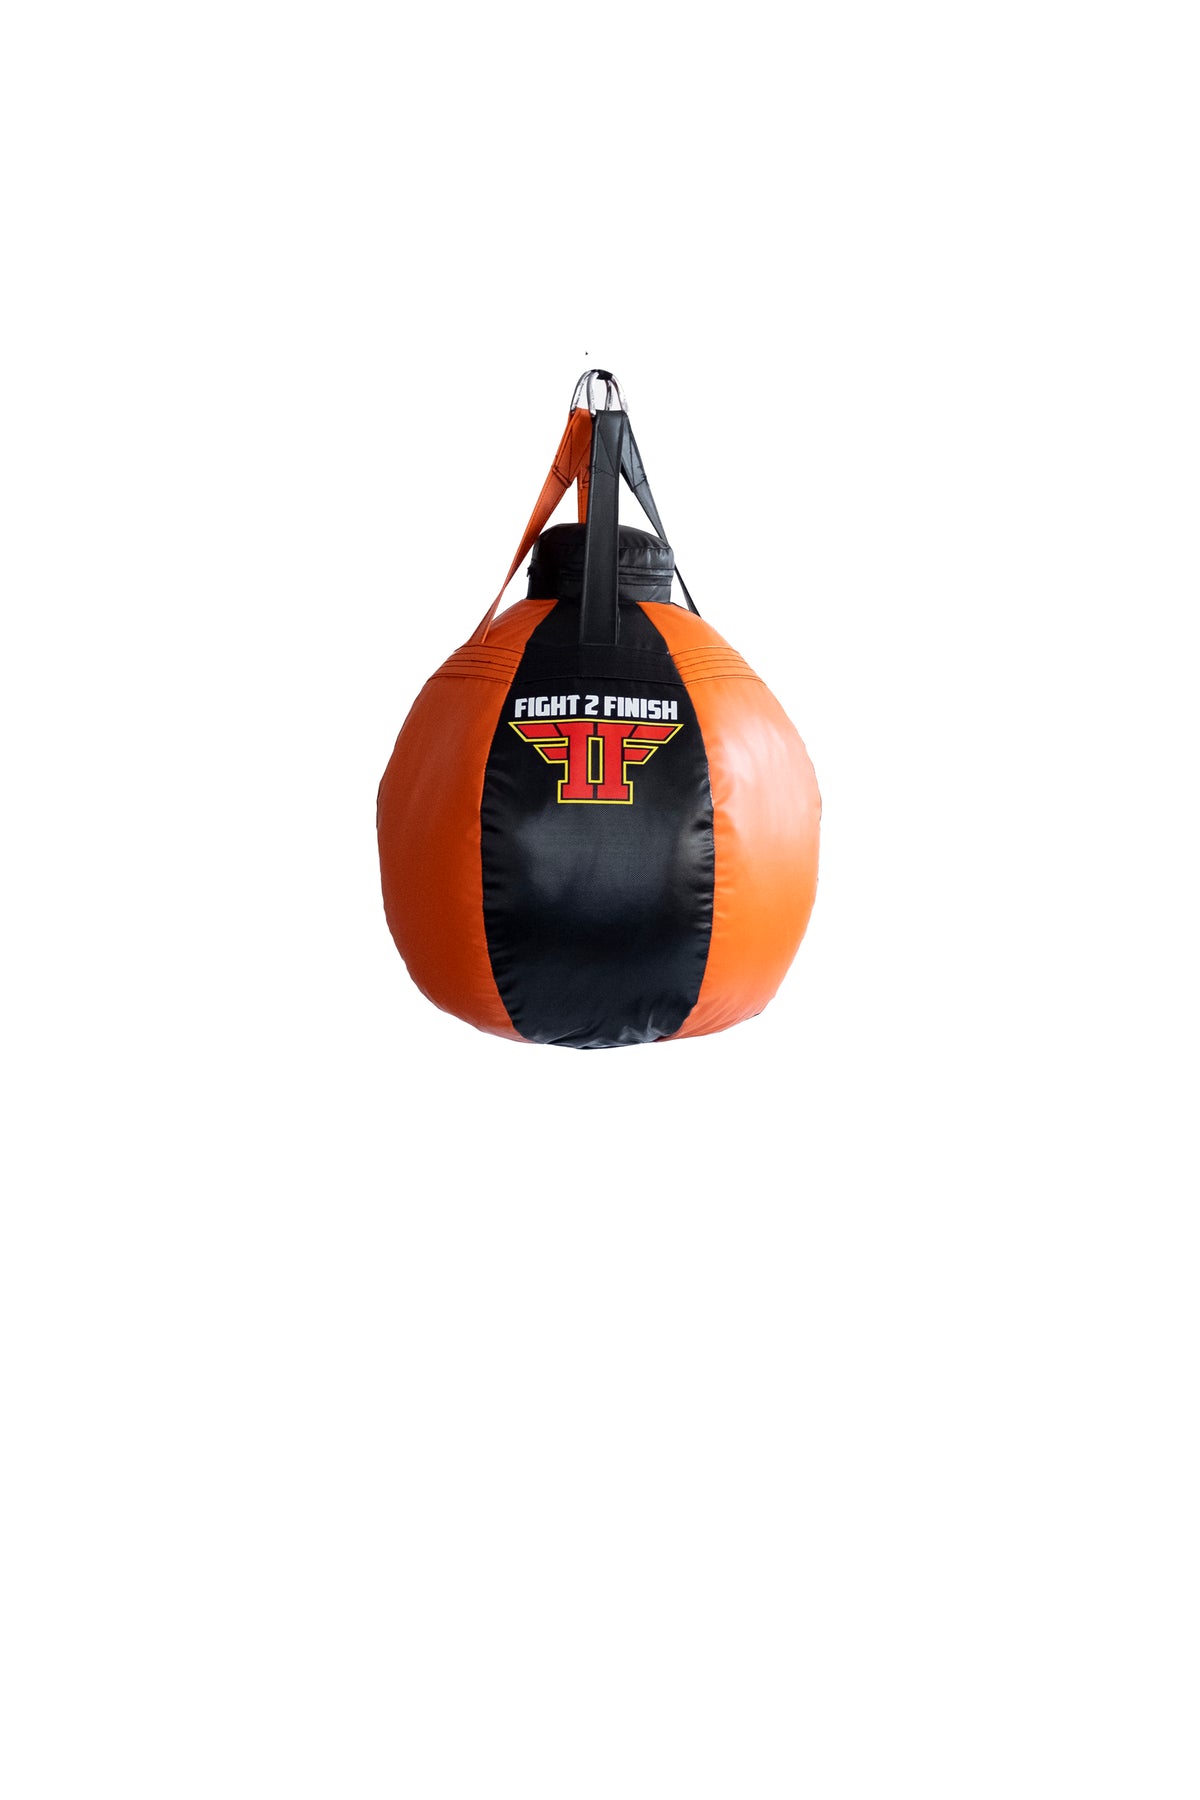 Fight 2 Finish Boxing Wrecking Ball Heavy Bag